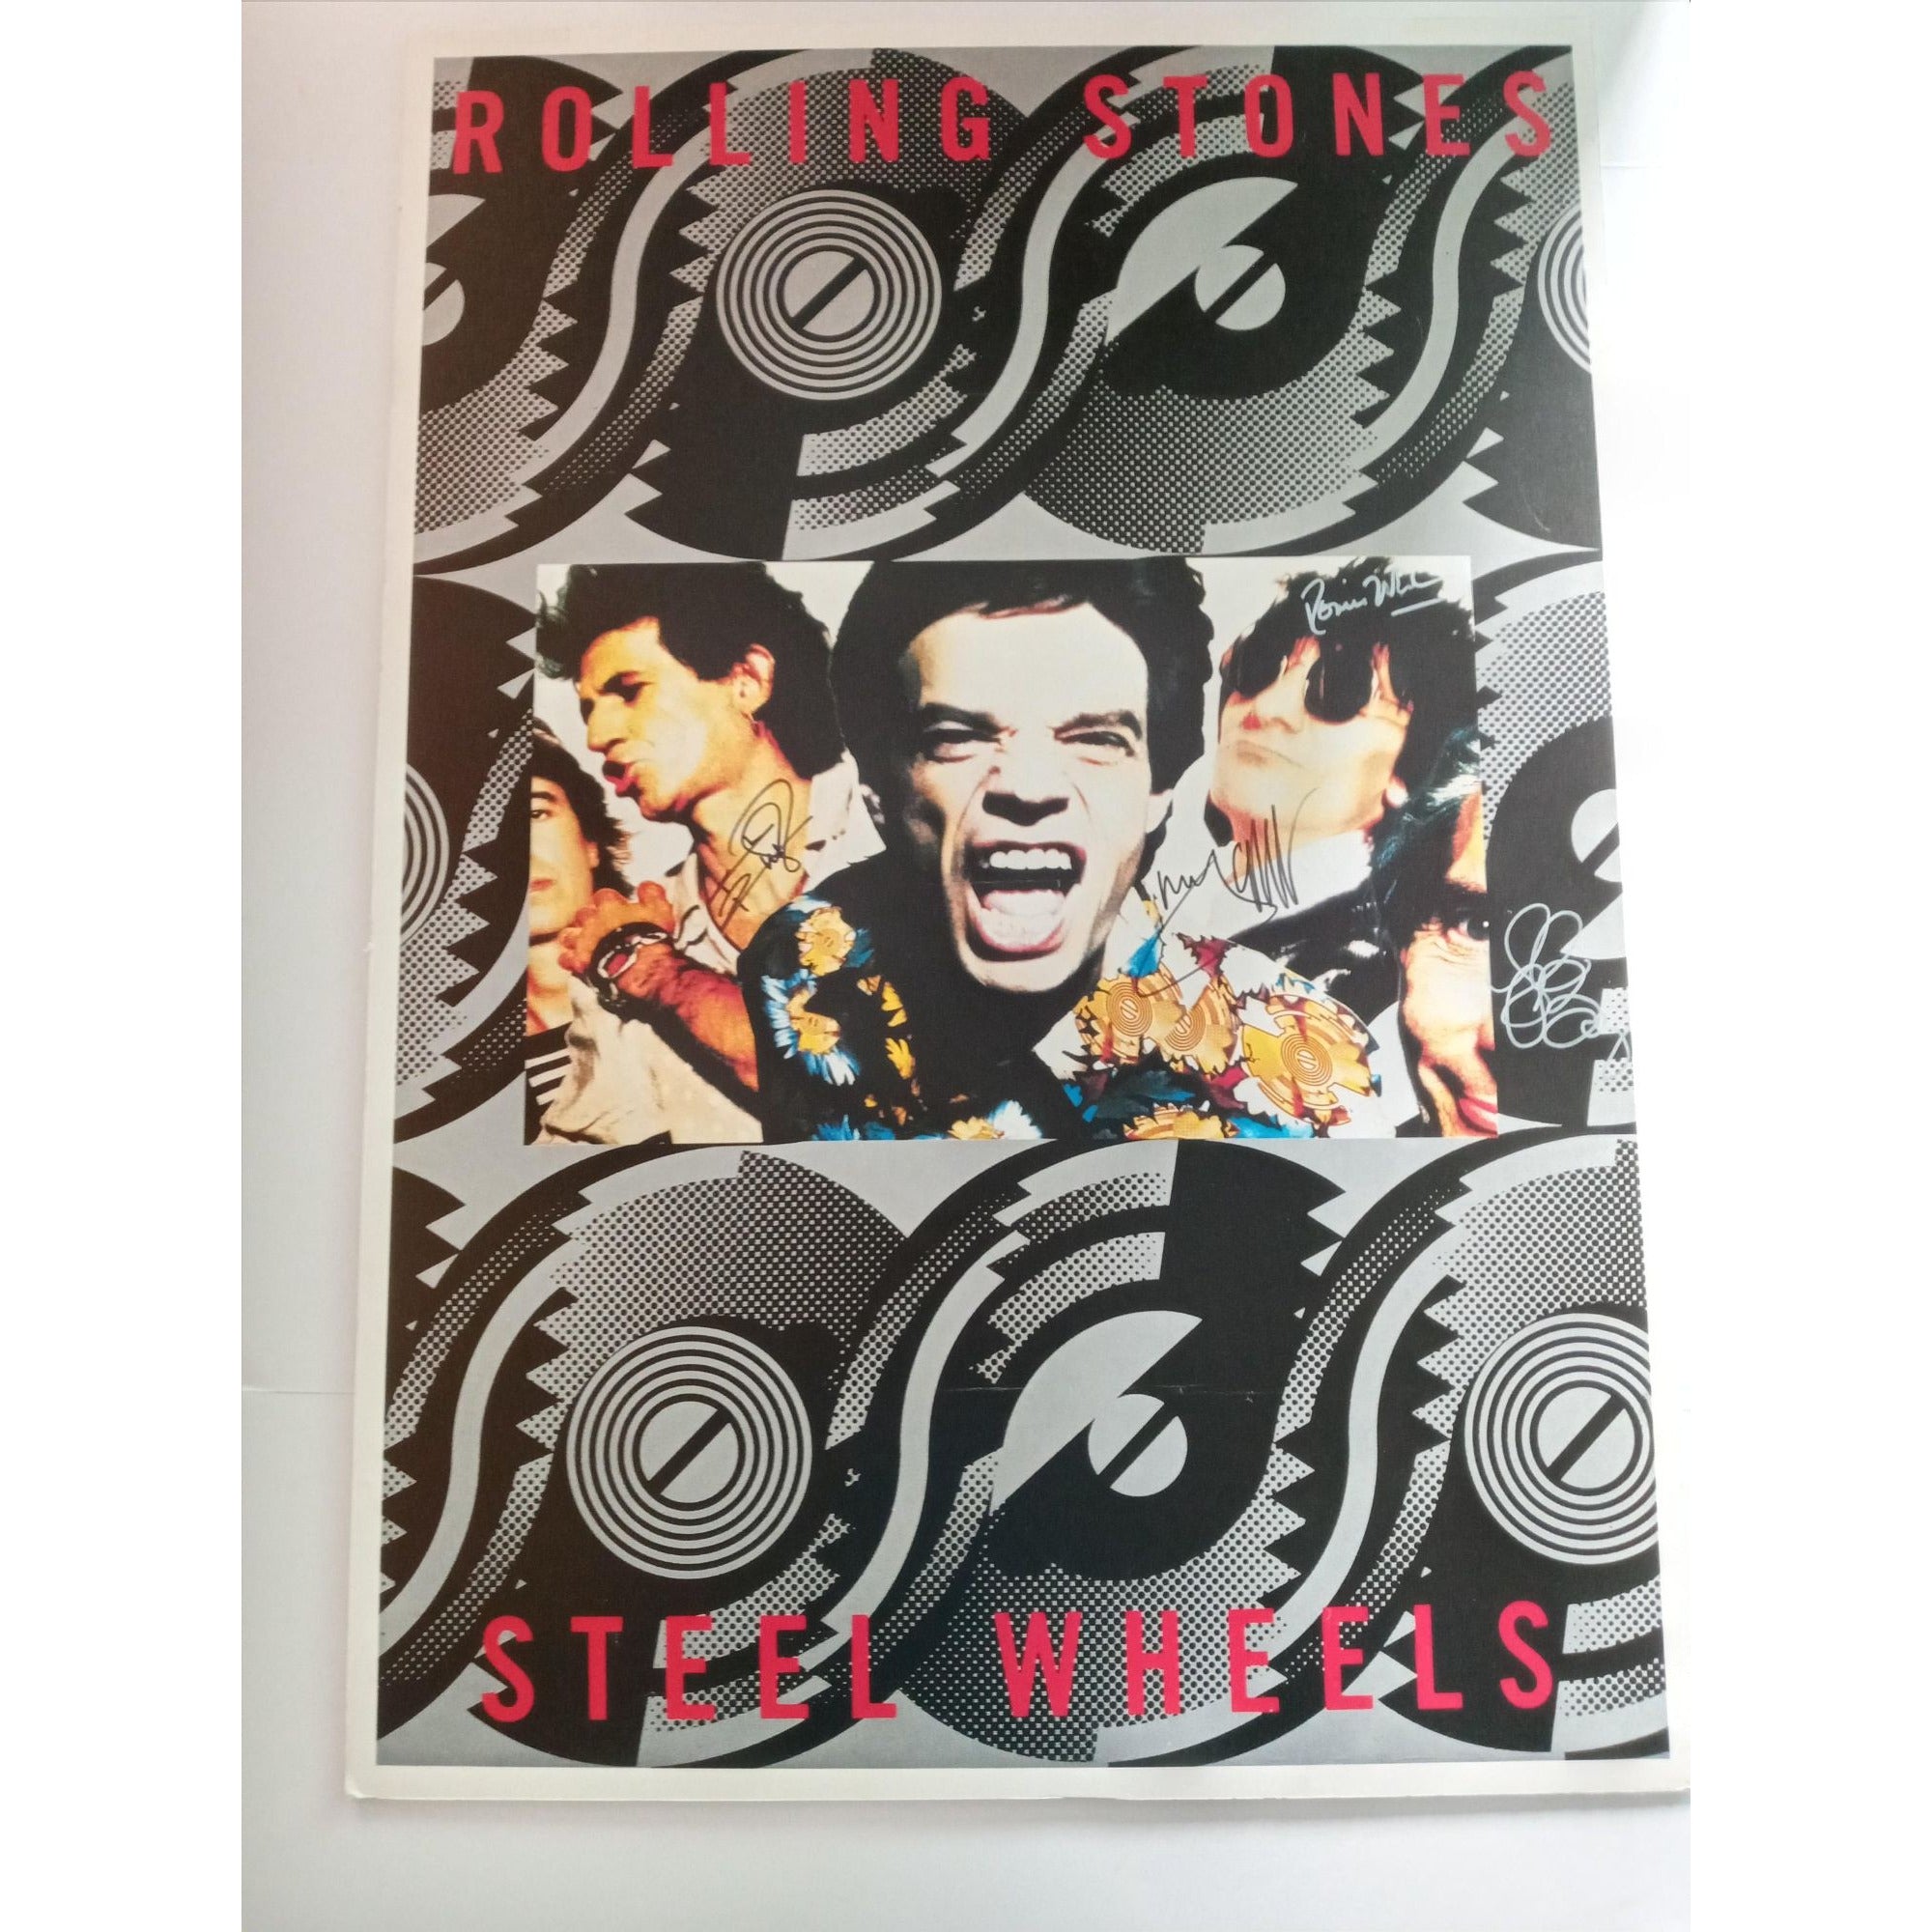 Keith Richards Ronnie Wood Mick Jagger Charlie Watts signed poster